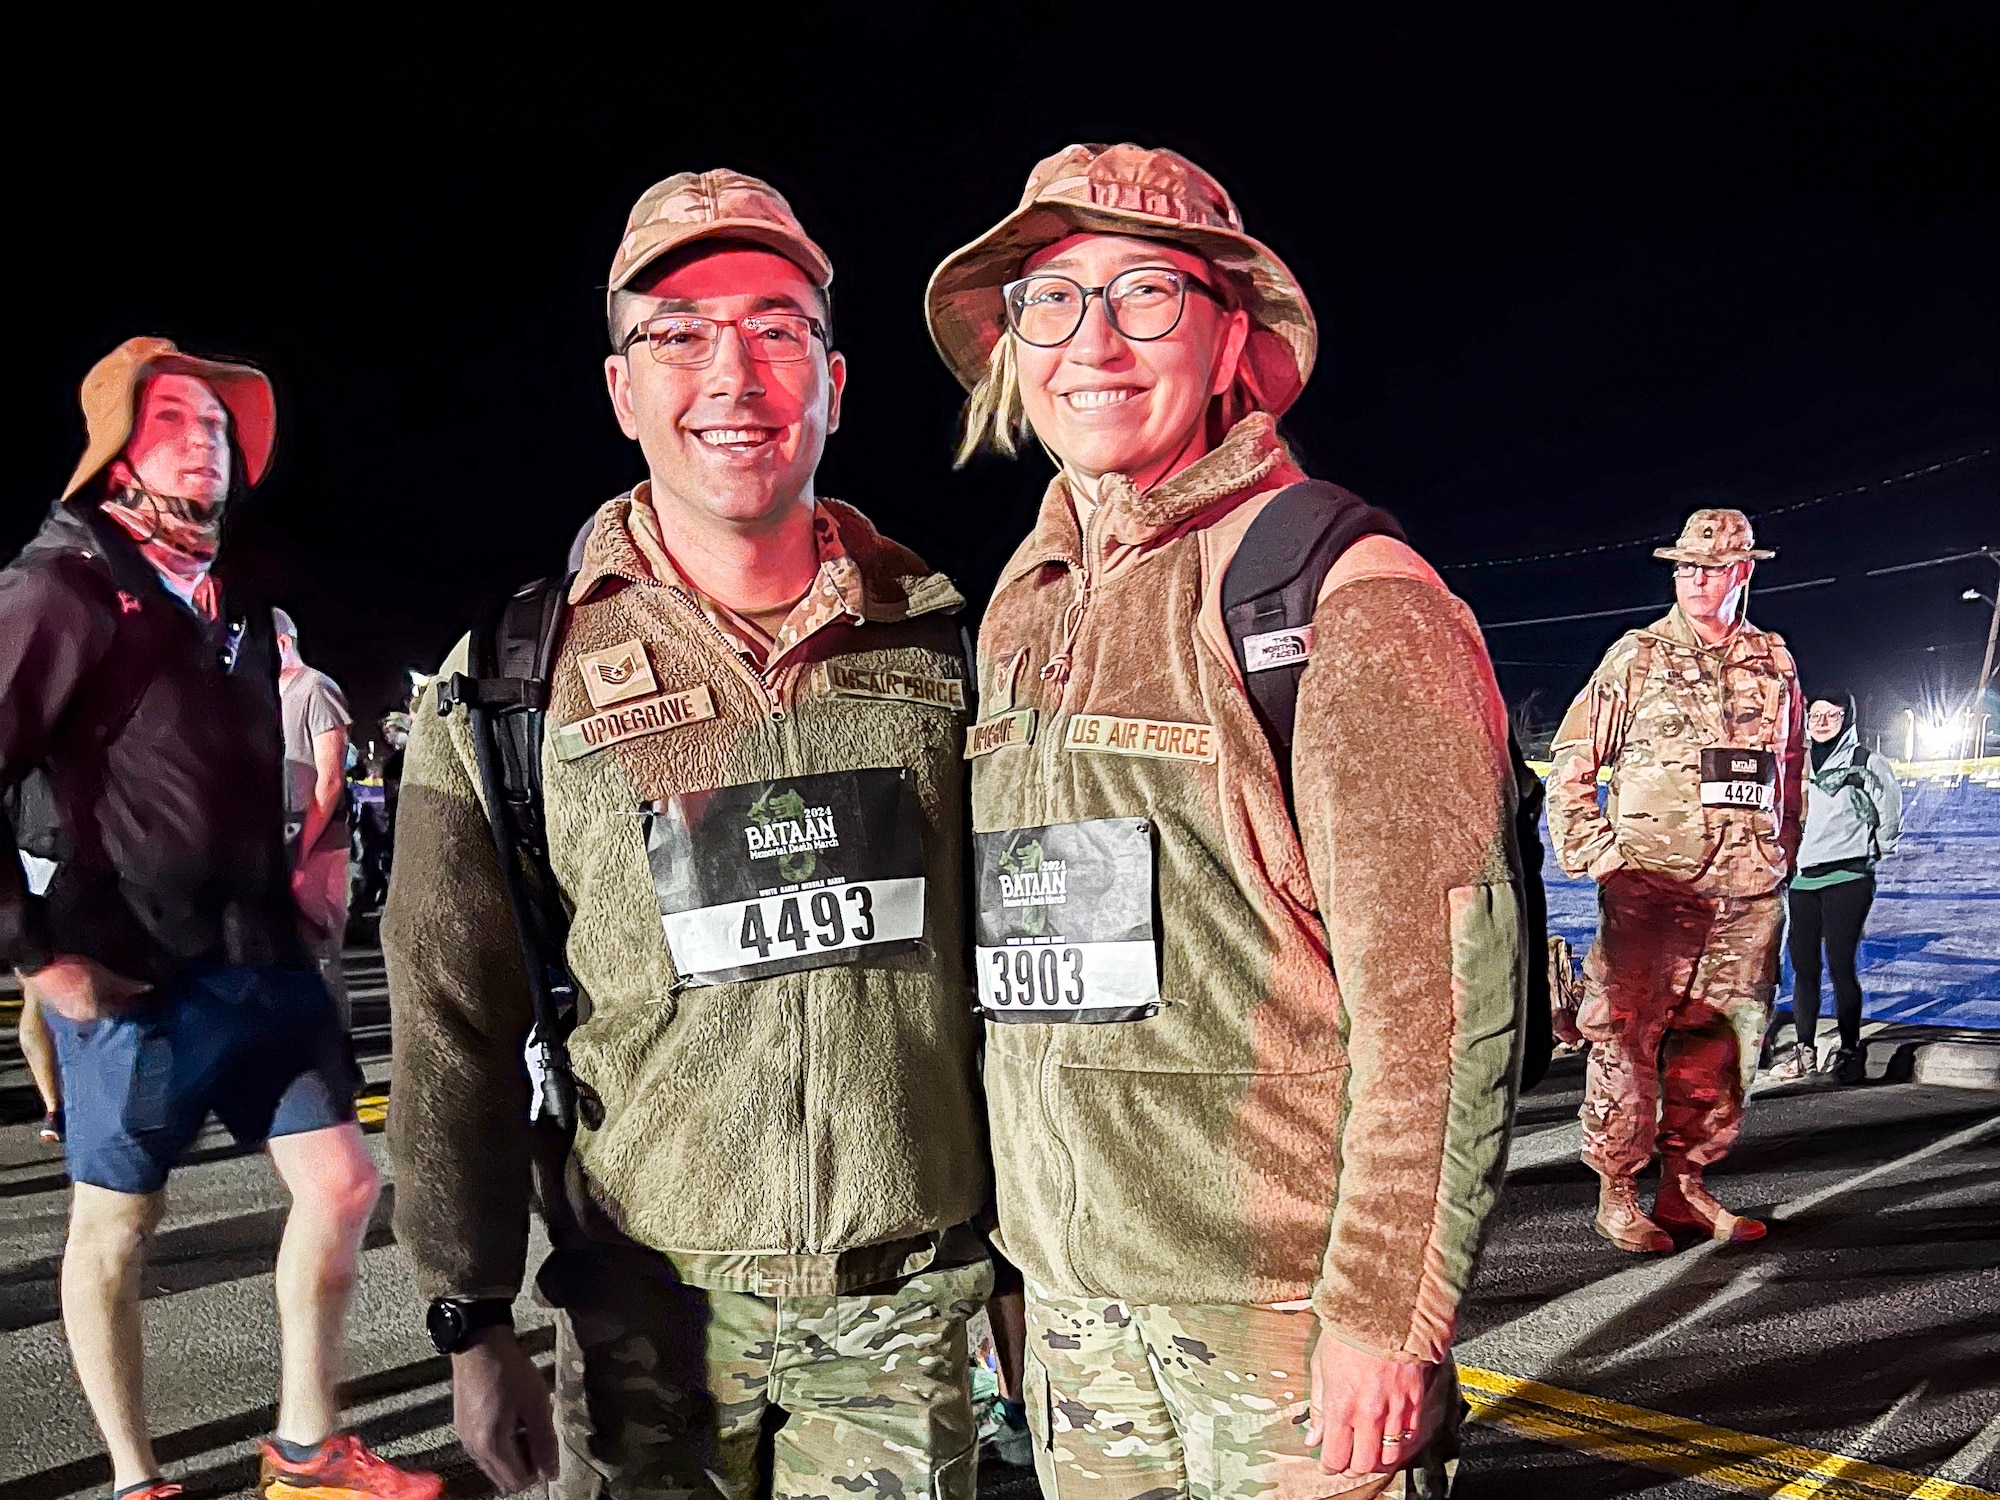 Tech. Sgt. Corey Updegrave, 412th Aircraft Maintenance Squadron, and Staff Sgt. Wendy Updegrave, Flight and Operational Medicine Clinic noncommissioned officer-in-charge, 412th Operational Medical Readiness Squadron, prepare to participate in the Bataan Memorial Death March at White Sands Missile Range, New Mexico, March. 16. (Photo courtesy of Staff Sgt. Wendy Updegrave)